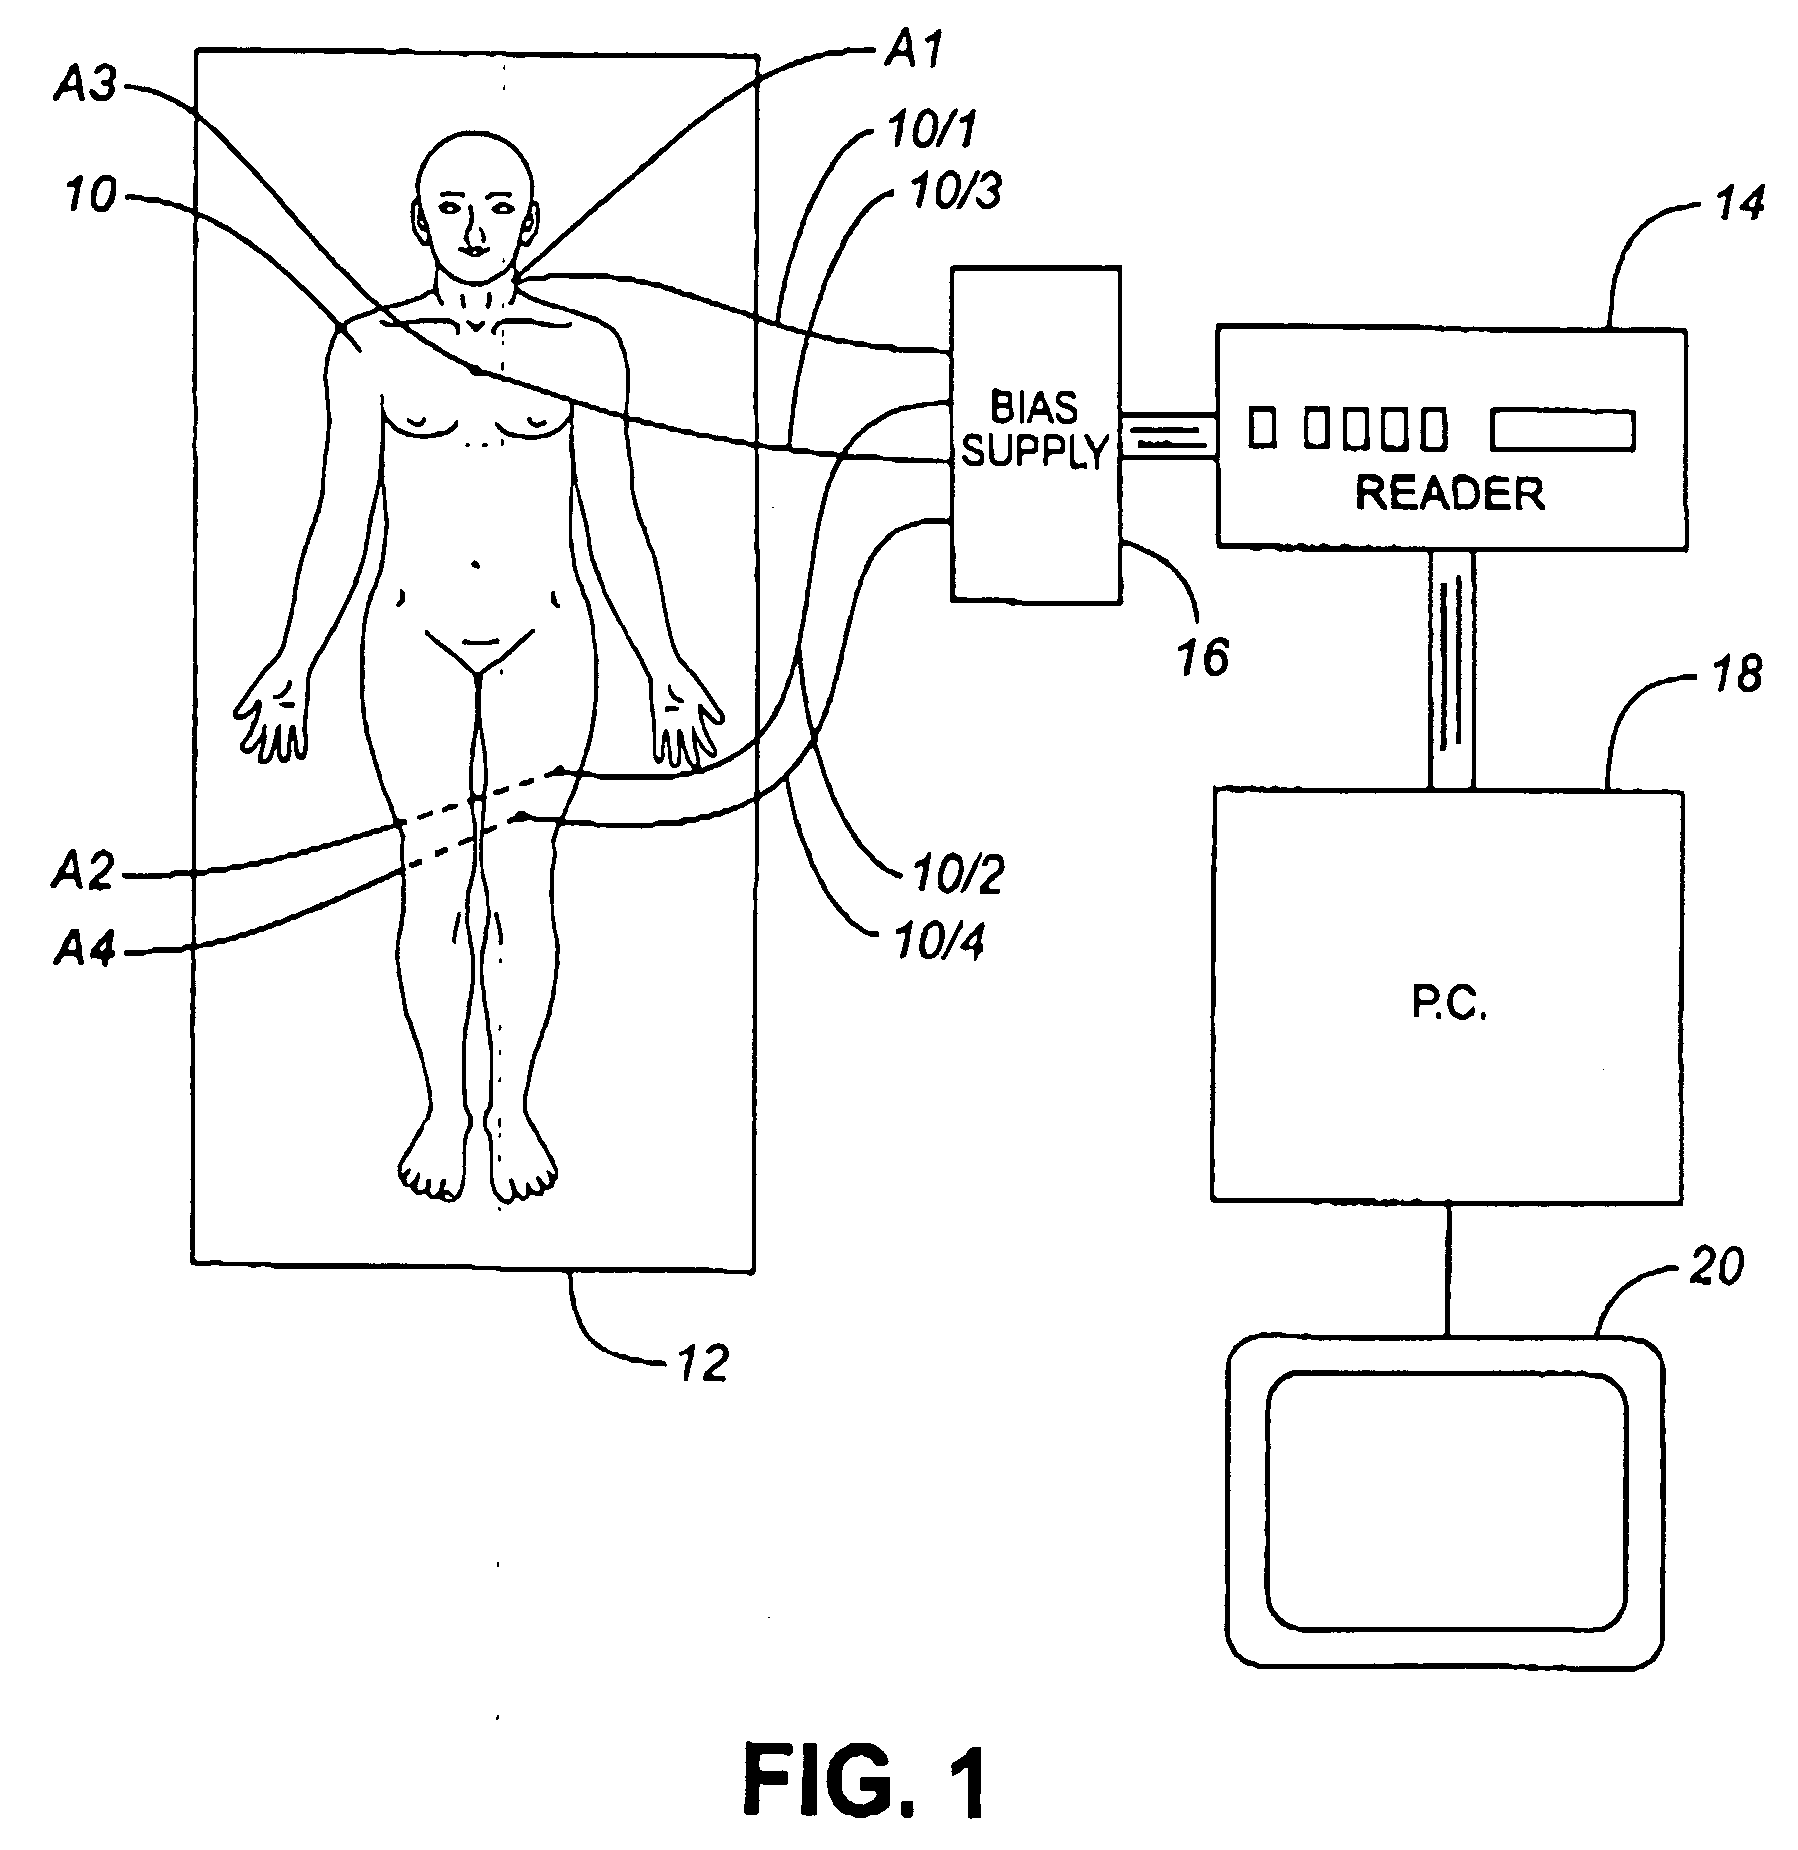 Radiation dosimetry reports and a method of producing same